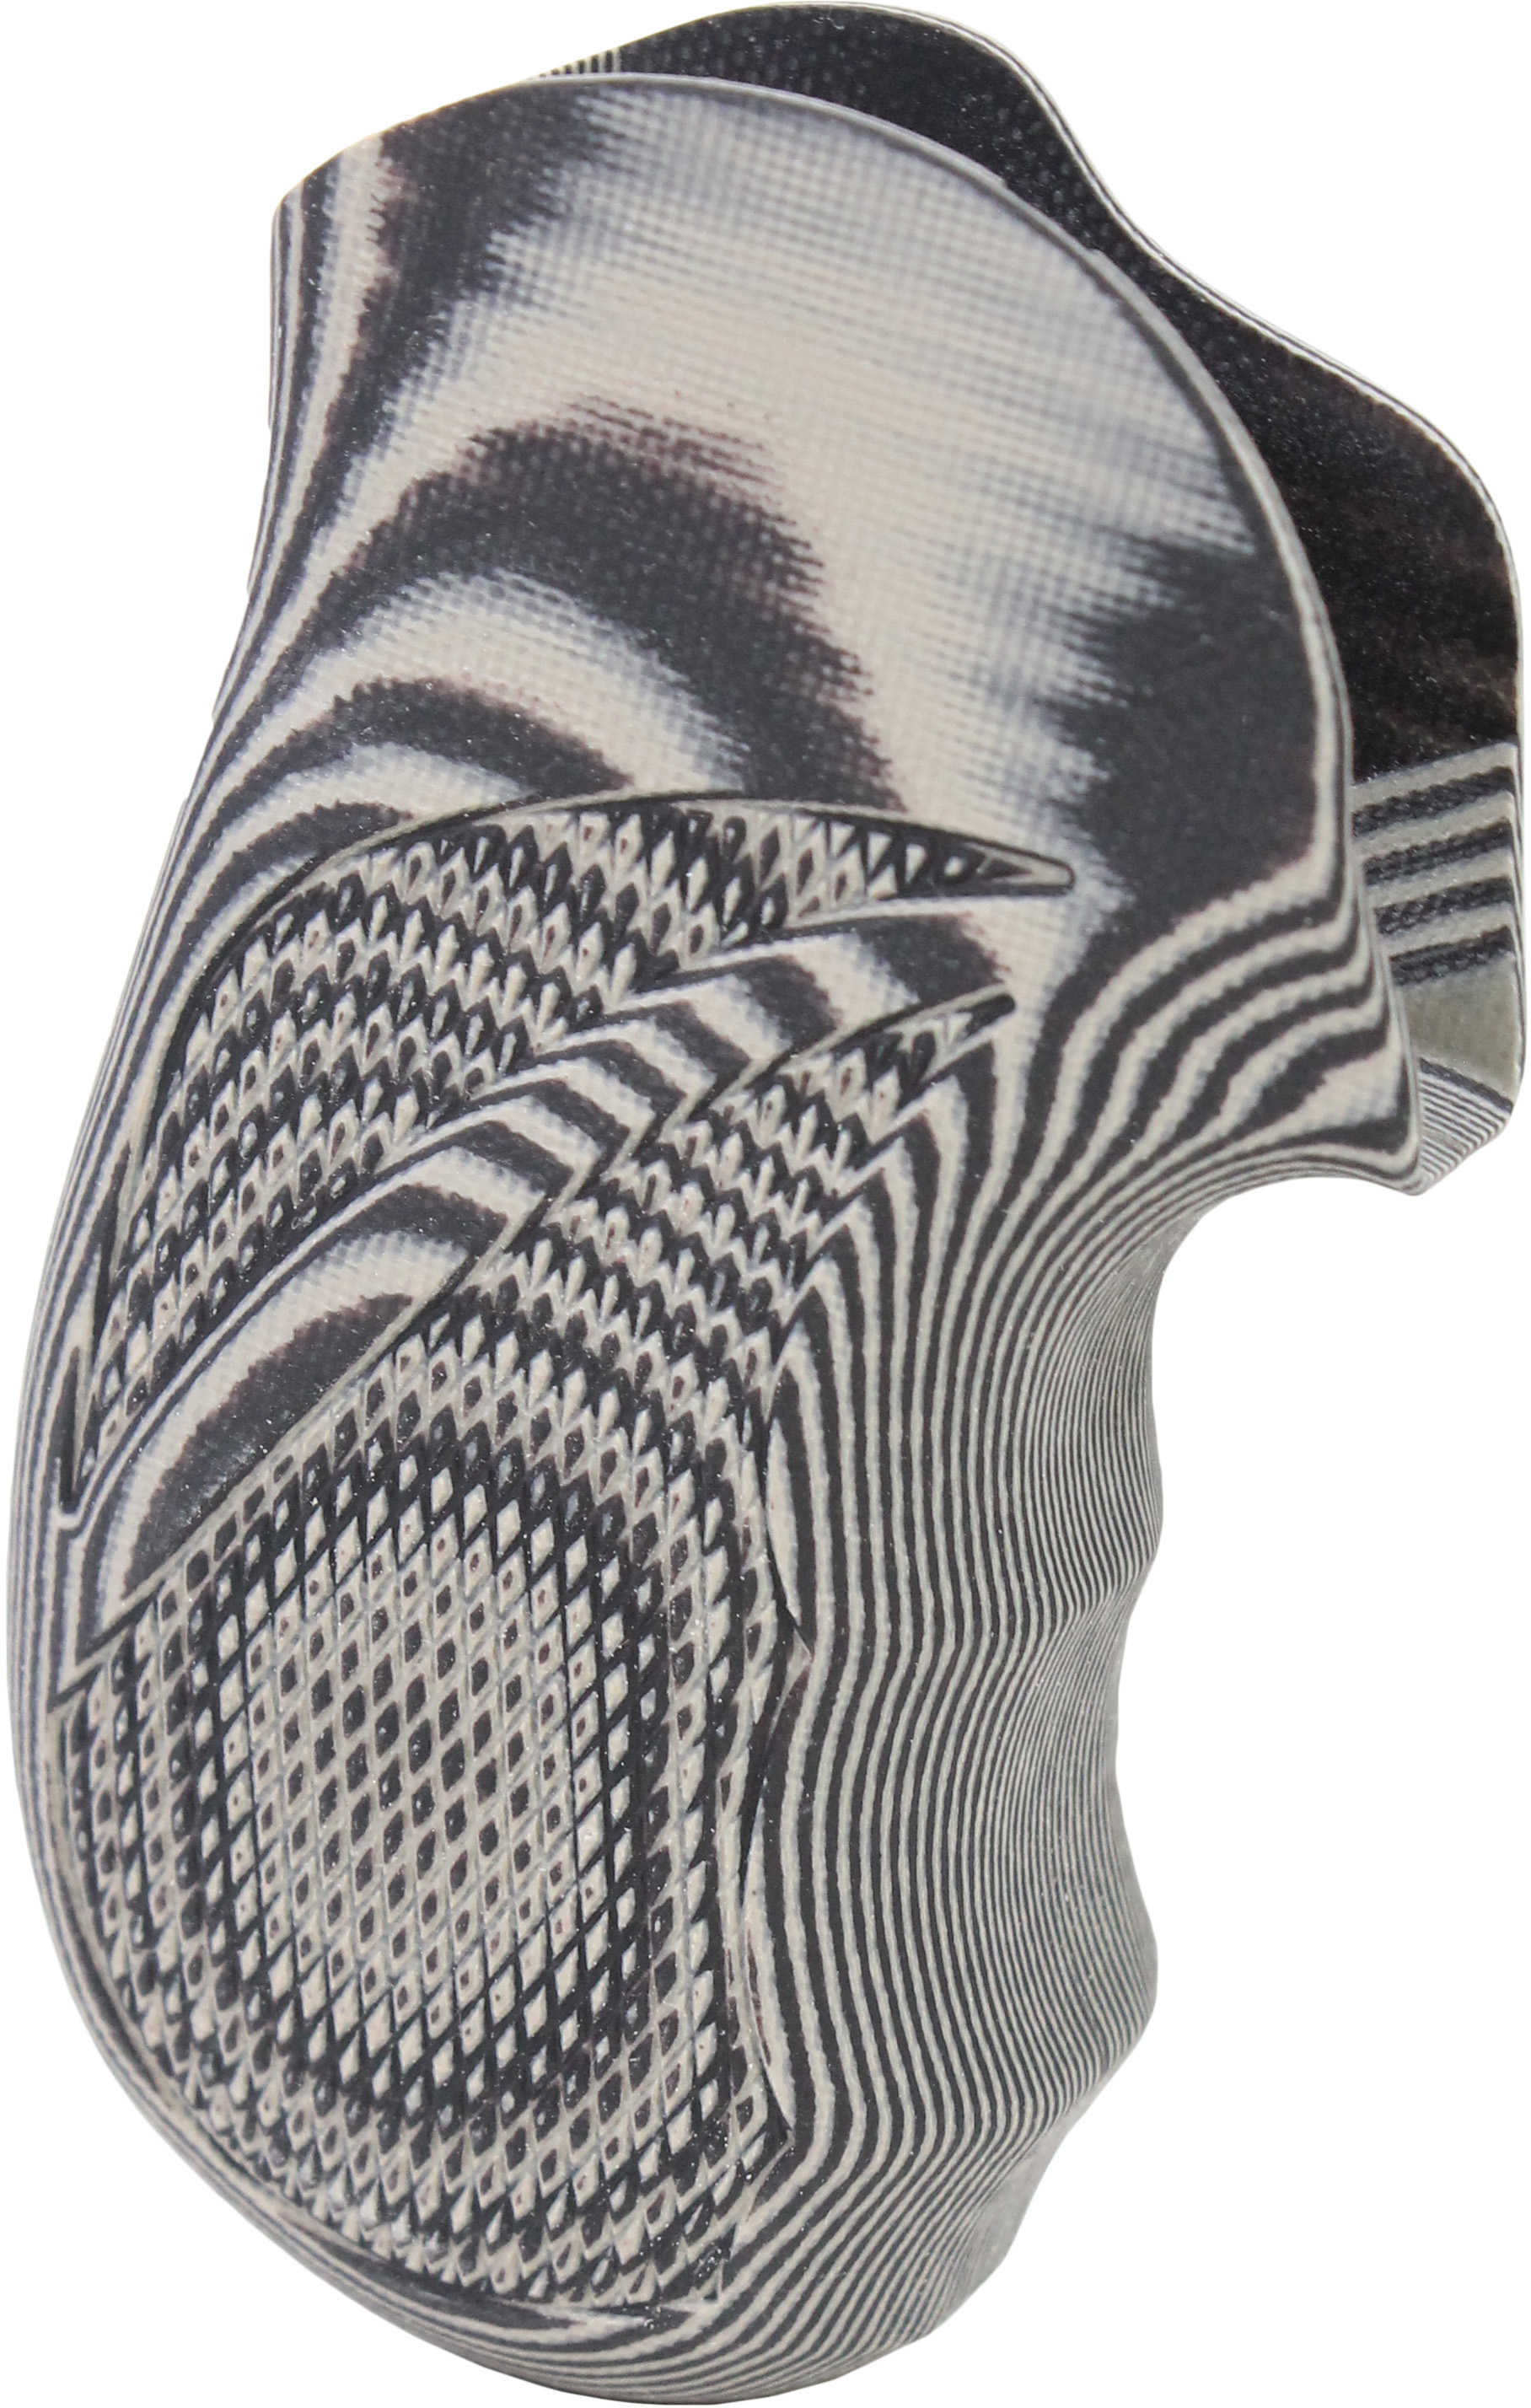 Pachmayr G10 Grips Ruger® LCR Grey/Black Checkered